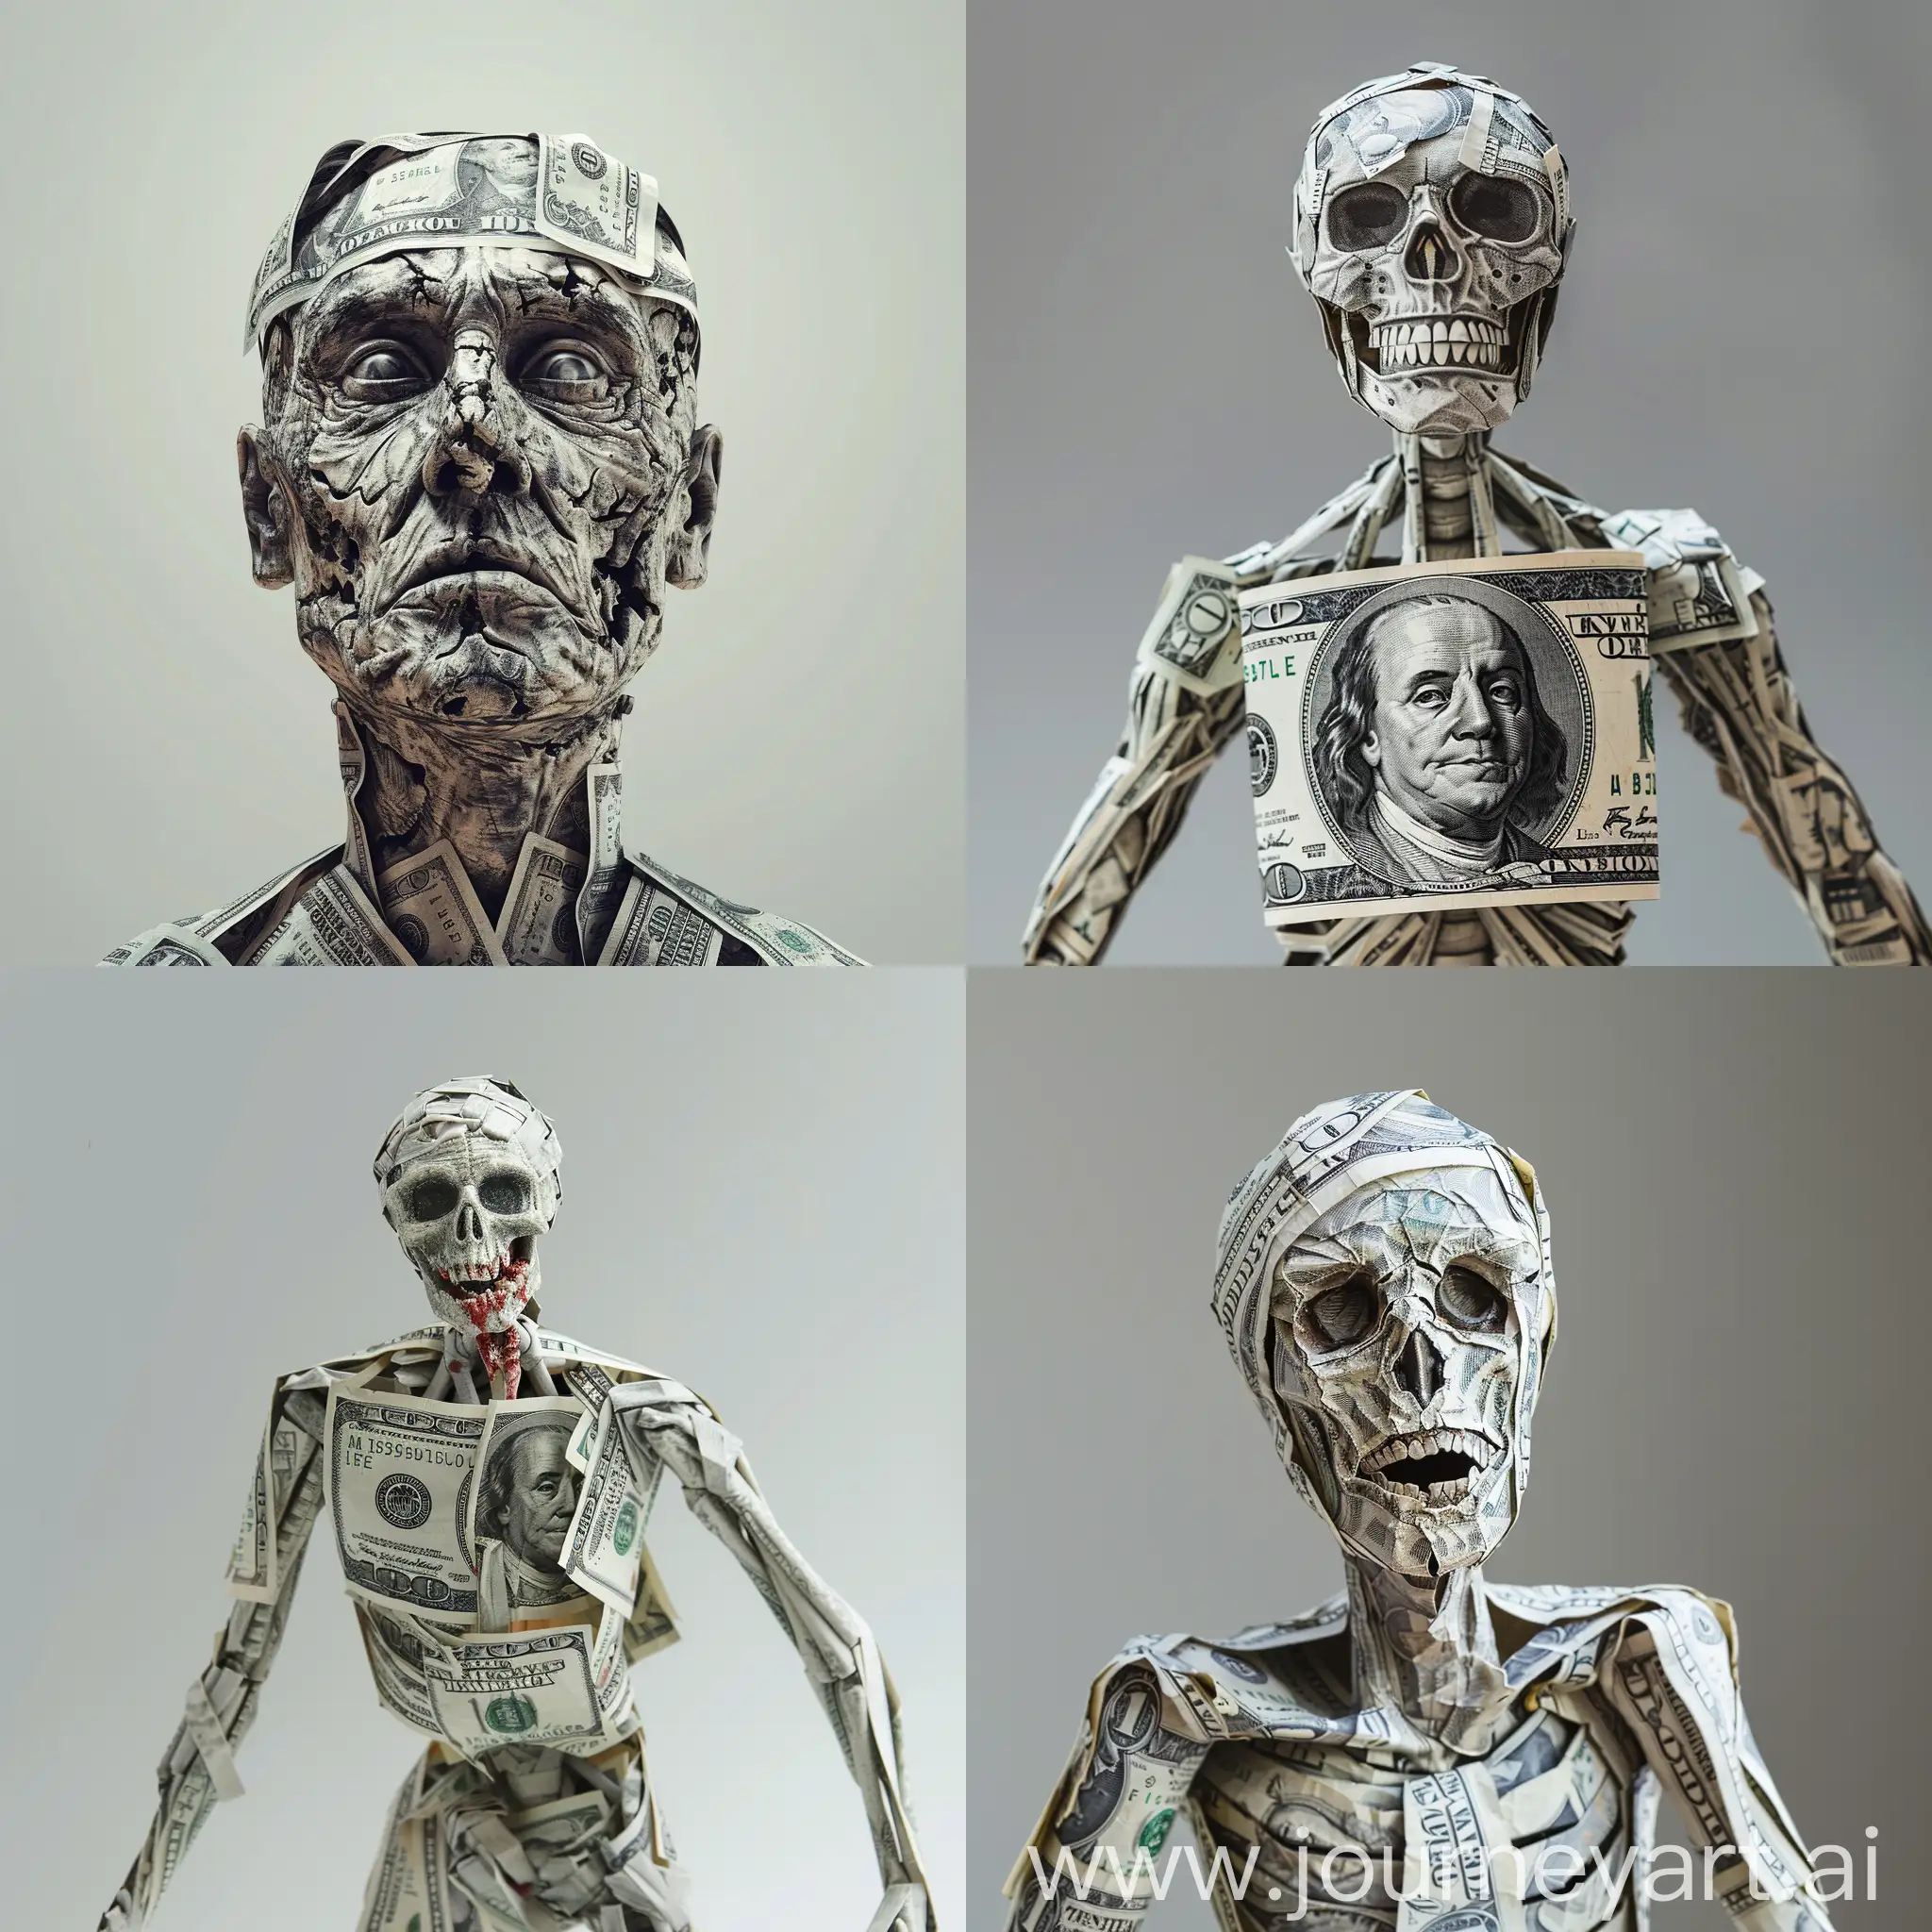 A minimal scary zombie made with dollars